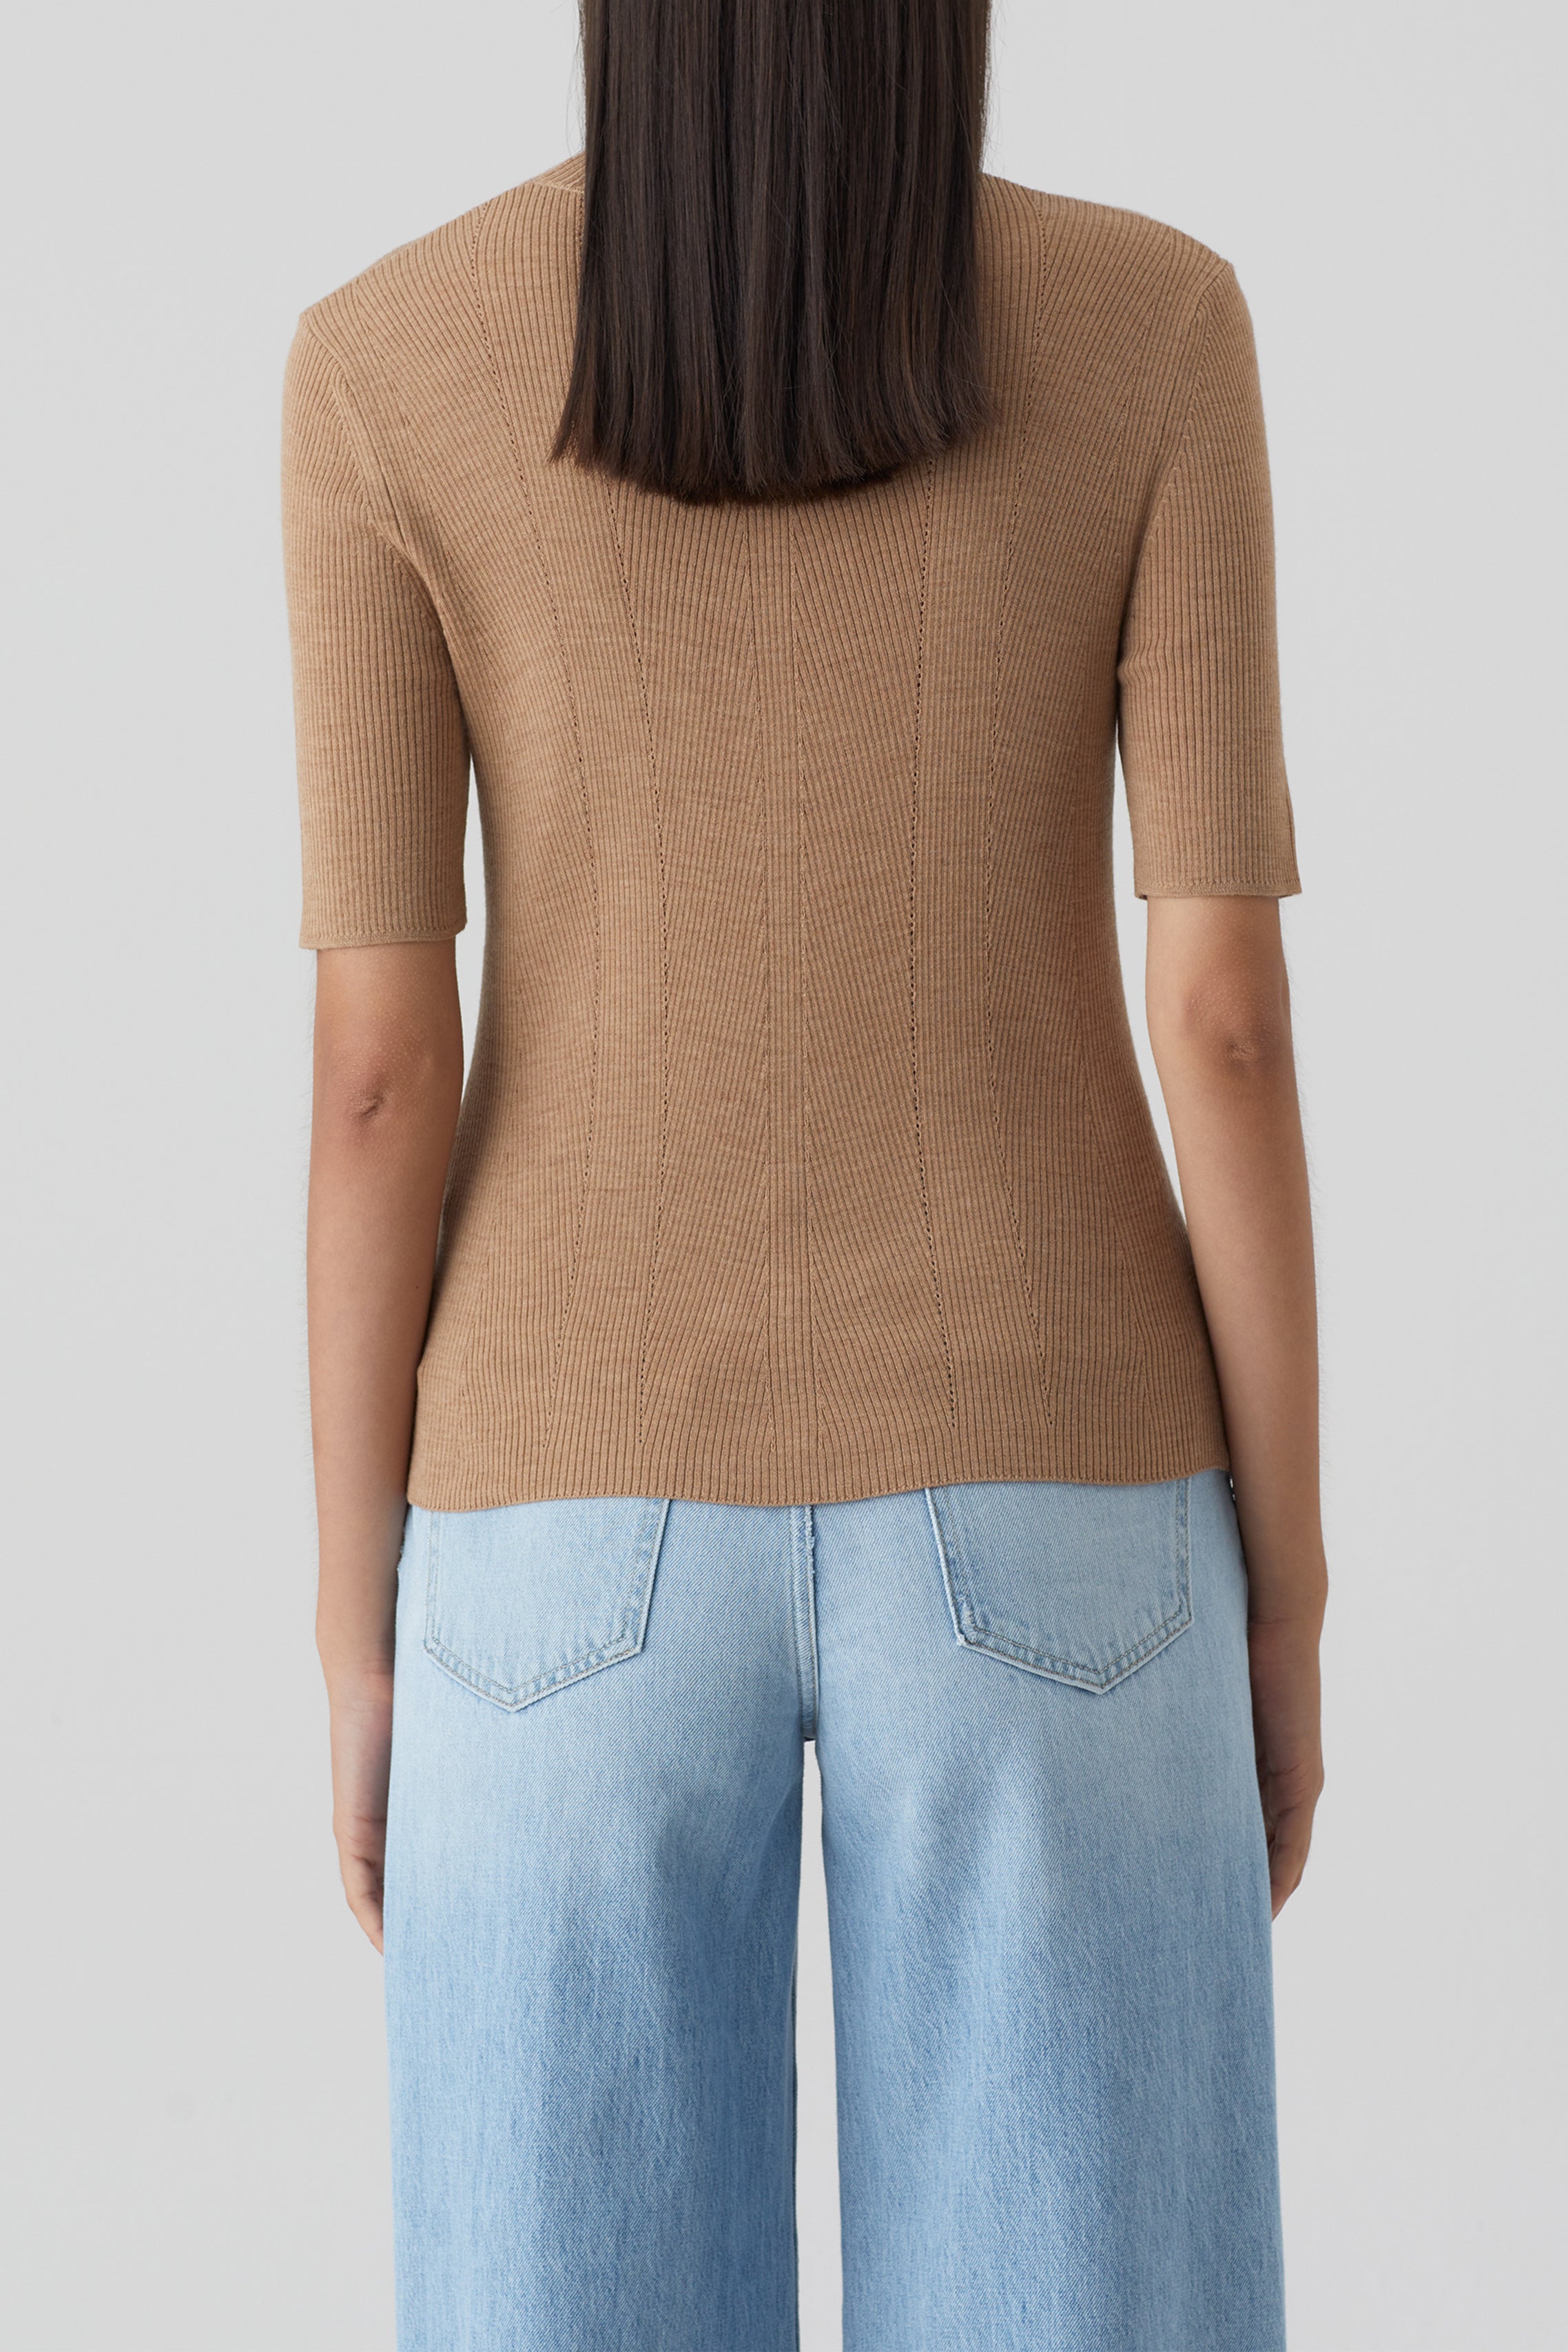 CLOSED-OUTLET-SALE-SHORT-SLEEVE-TURTLENECK-KNITS-Strick-ARCHIVE-COLLECTION-2.jpg